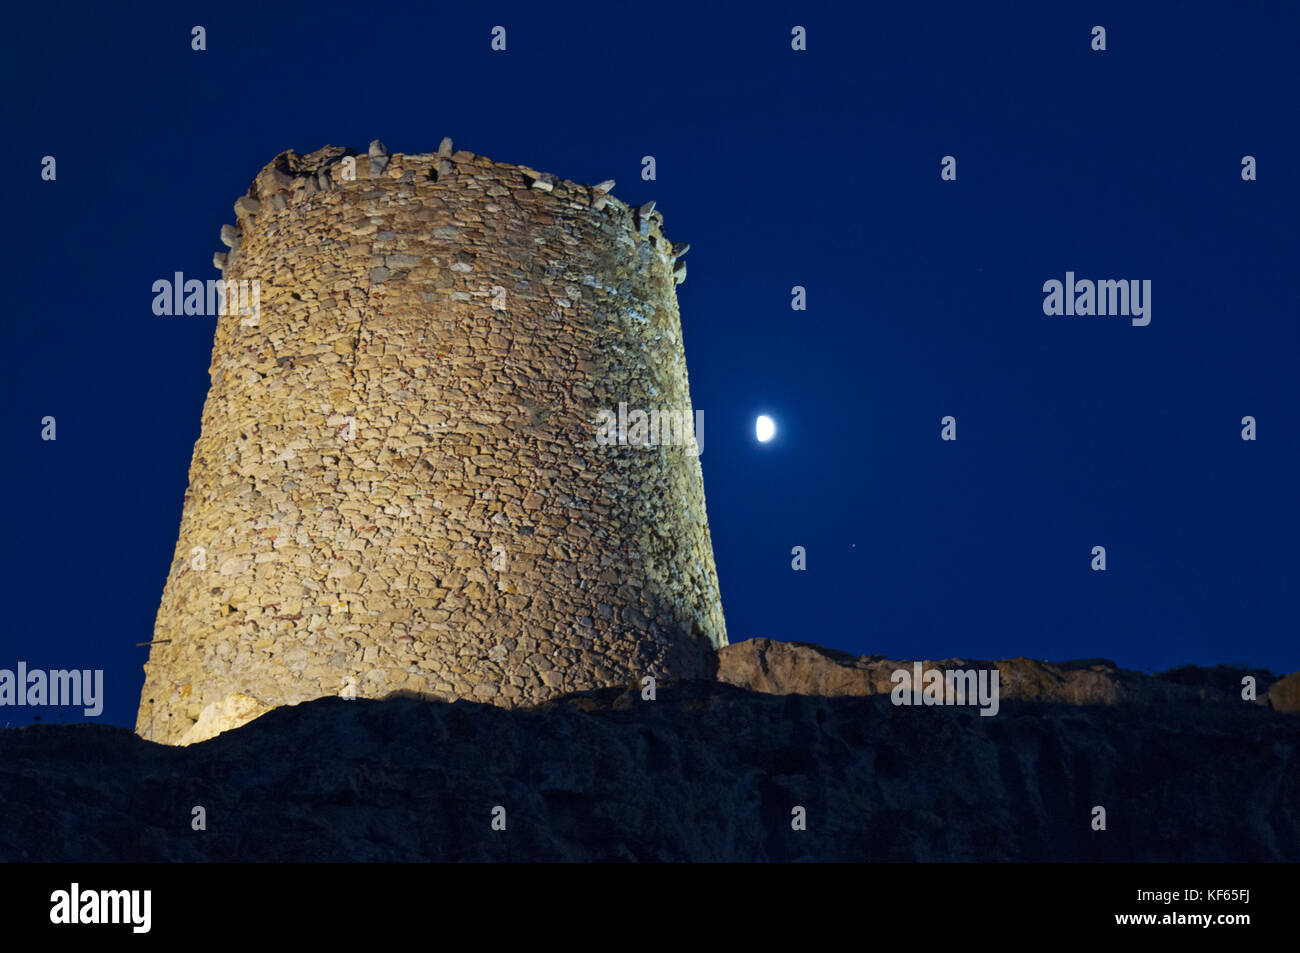 Corsica: moonlight on the Genoese Tower (15th century) on the top of the Ile de la Pietra (Stone Island), rocky promontory of Ile-Rousse (Red Island) Stock Photo